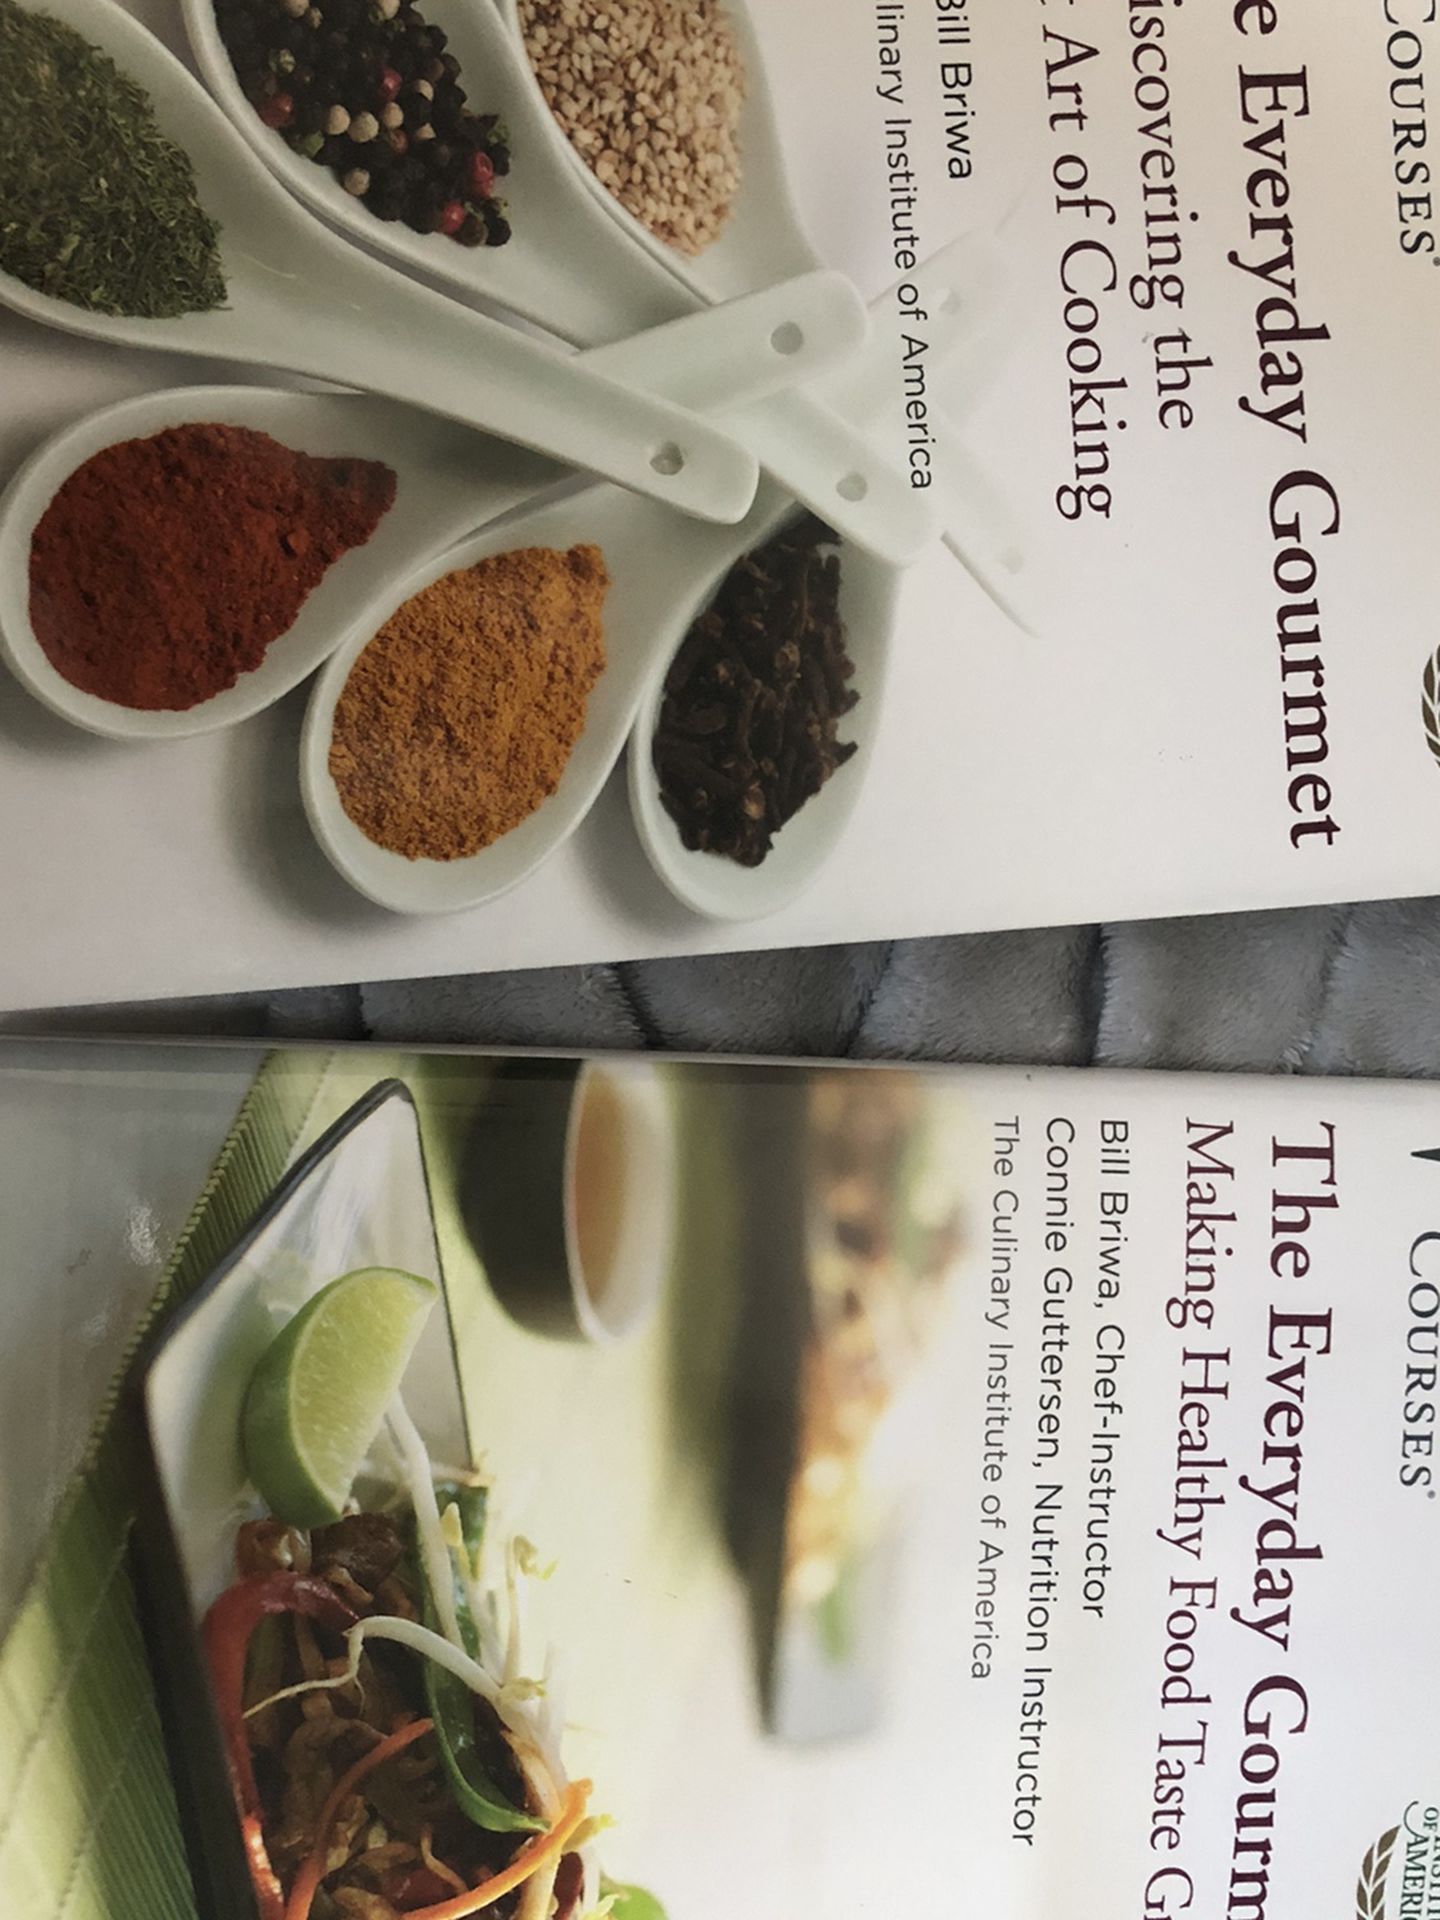 The Everyday Gourmet, 2 Books by The Great Courses